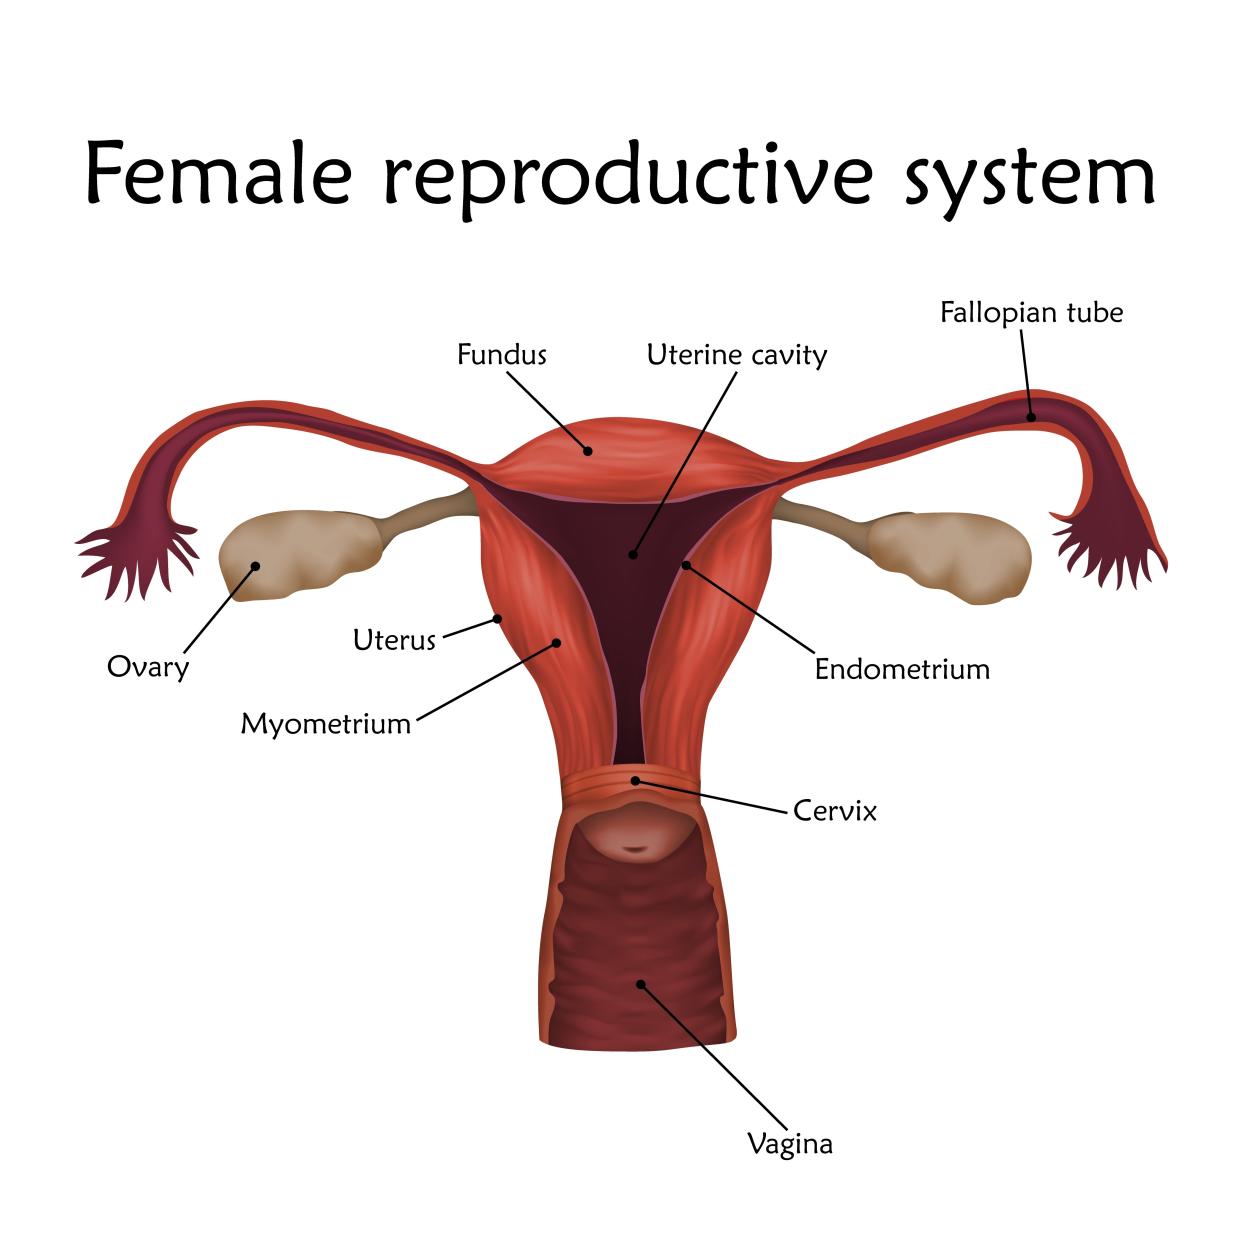 Female reproductive system with labels, illustration.